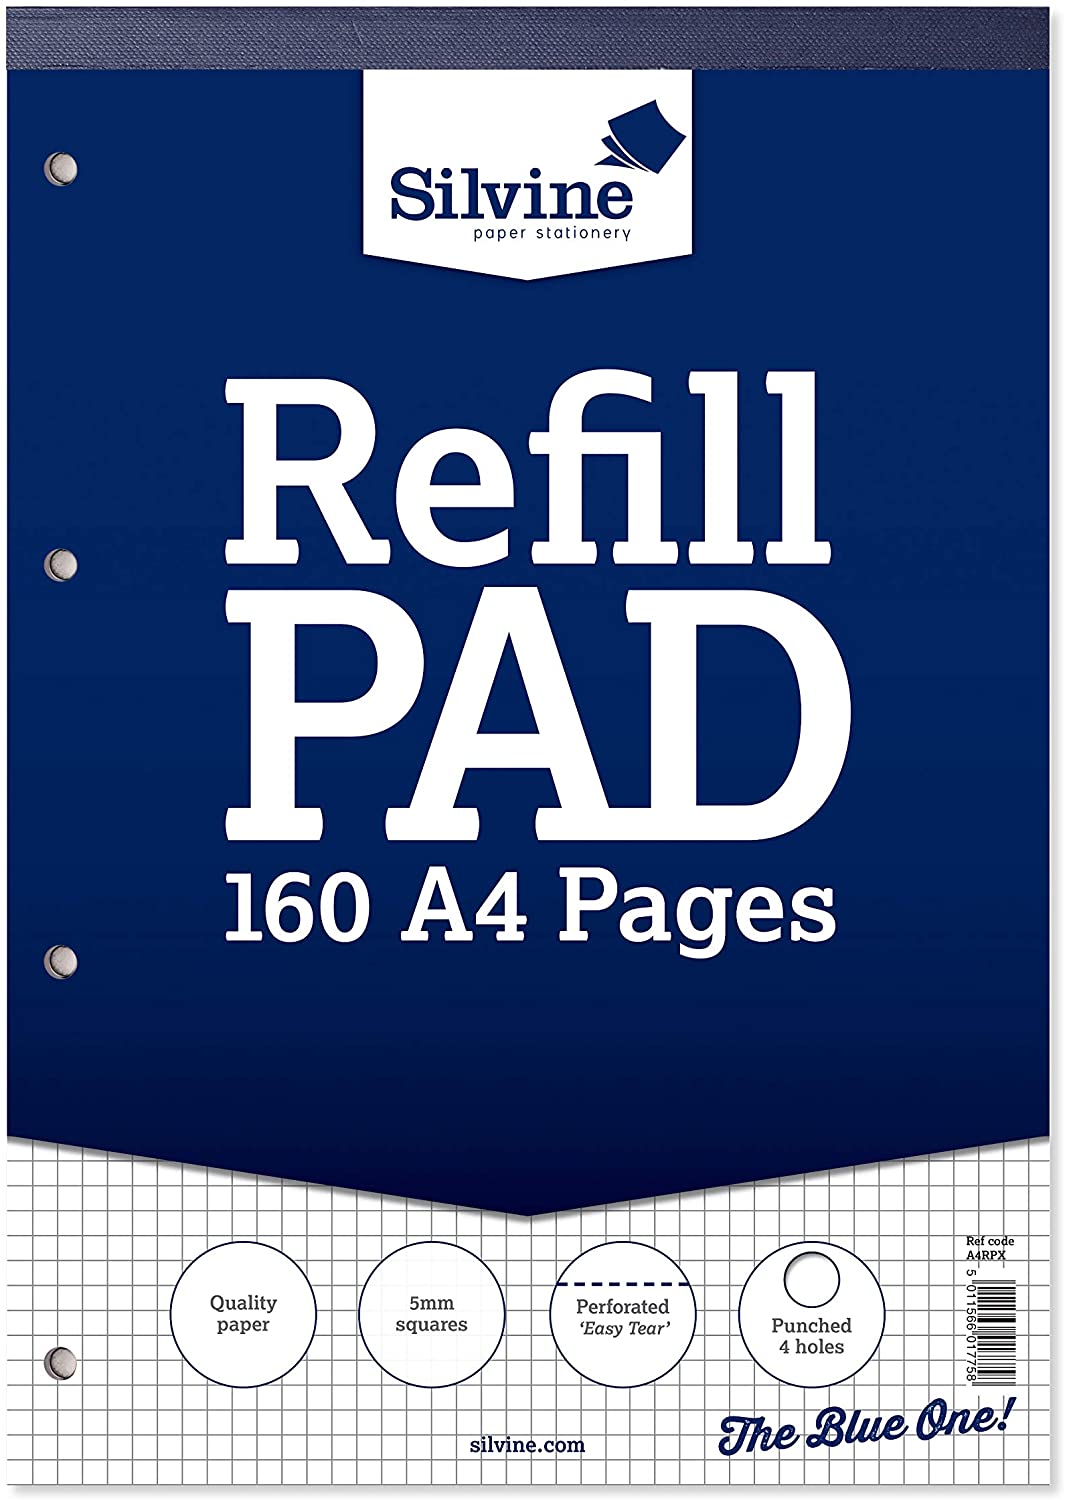 Silvine Refill Pad A4 160 Pages Ruled/5mm Square/Graph perforated punched 4 hole